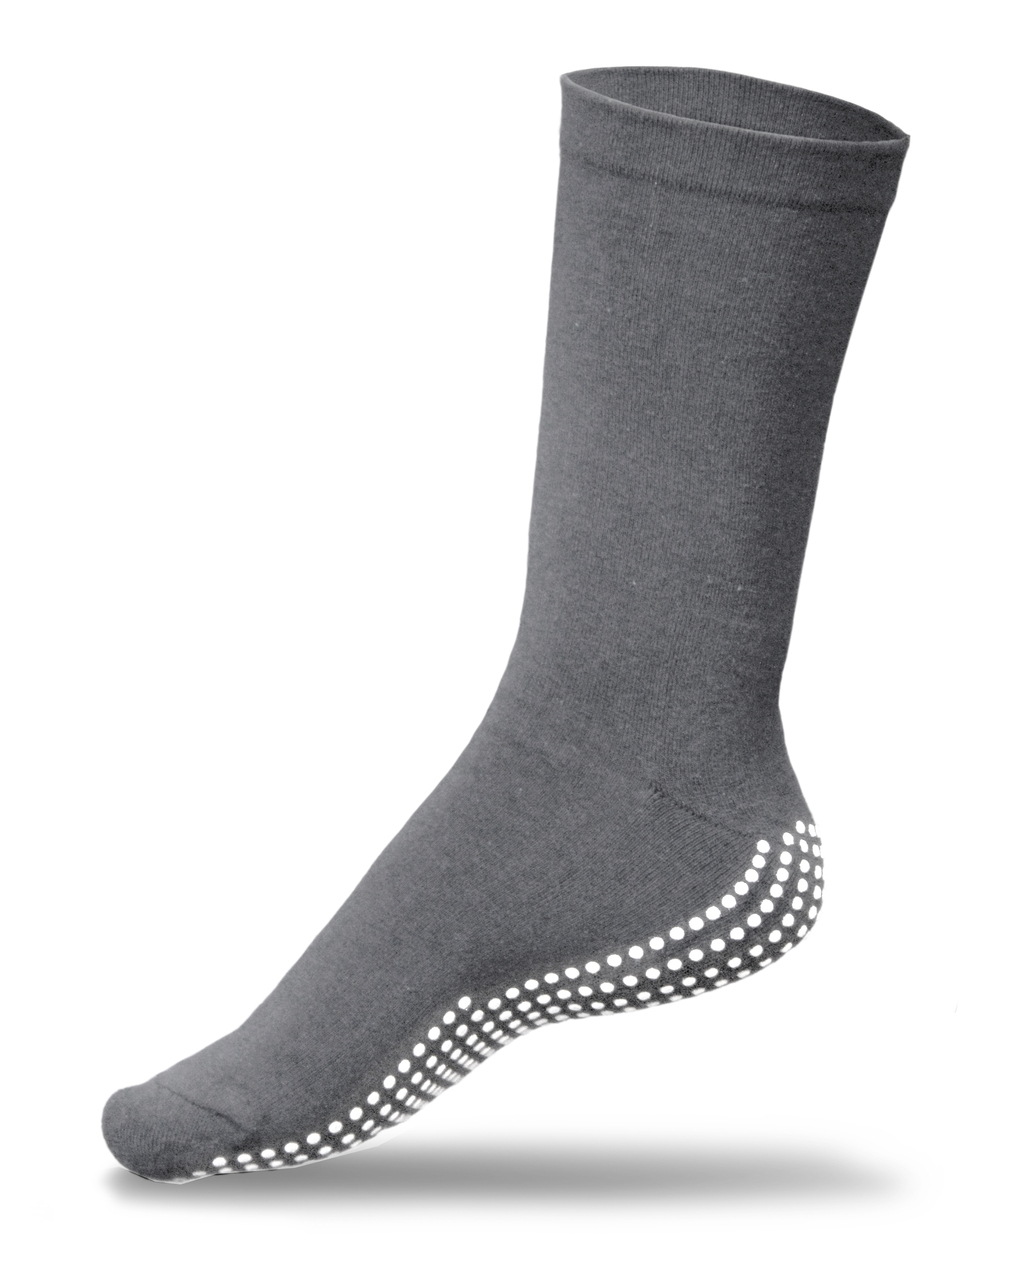 Gripperz Maxi Hospital Socks // Non Slip // Diabetic Safe - All Ages  Podiatry & Mobility